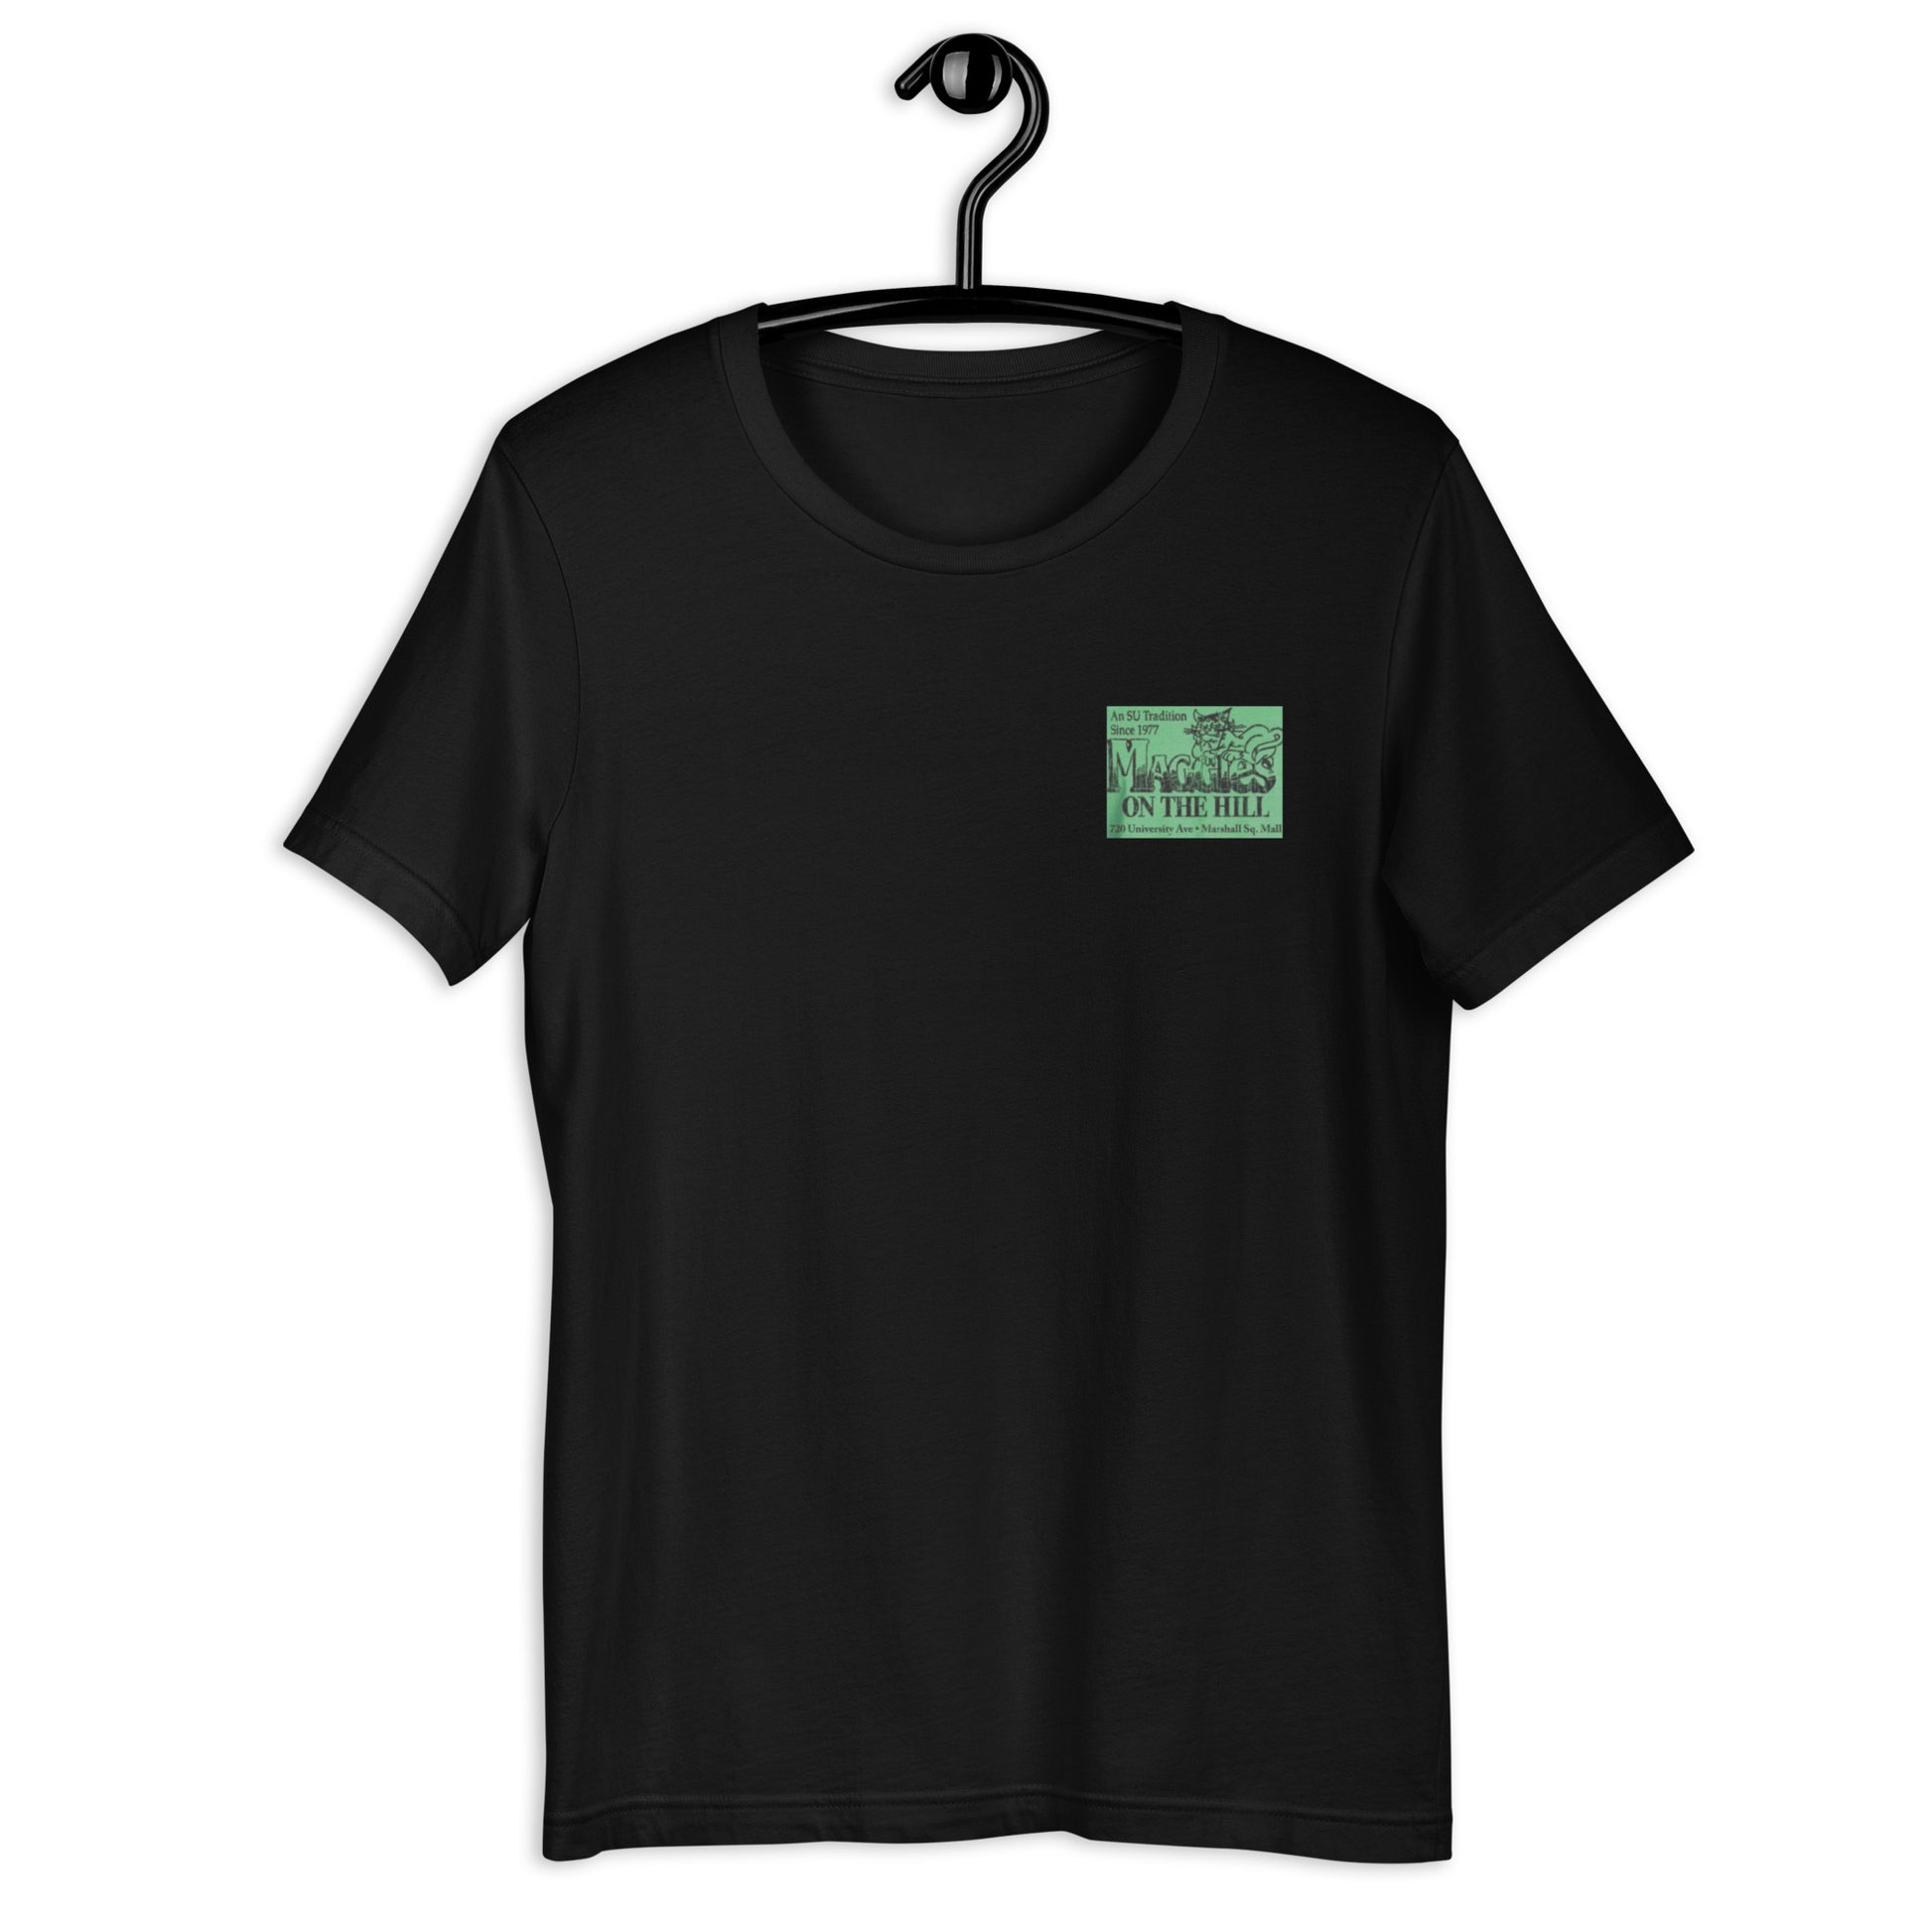 Black unisex tee shirt that says 'Maggie's on the Hill' in green and black